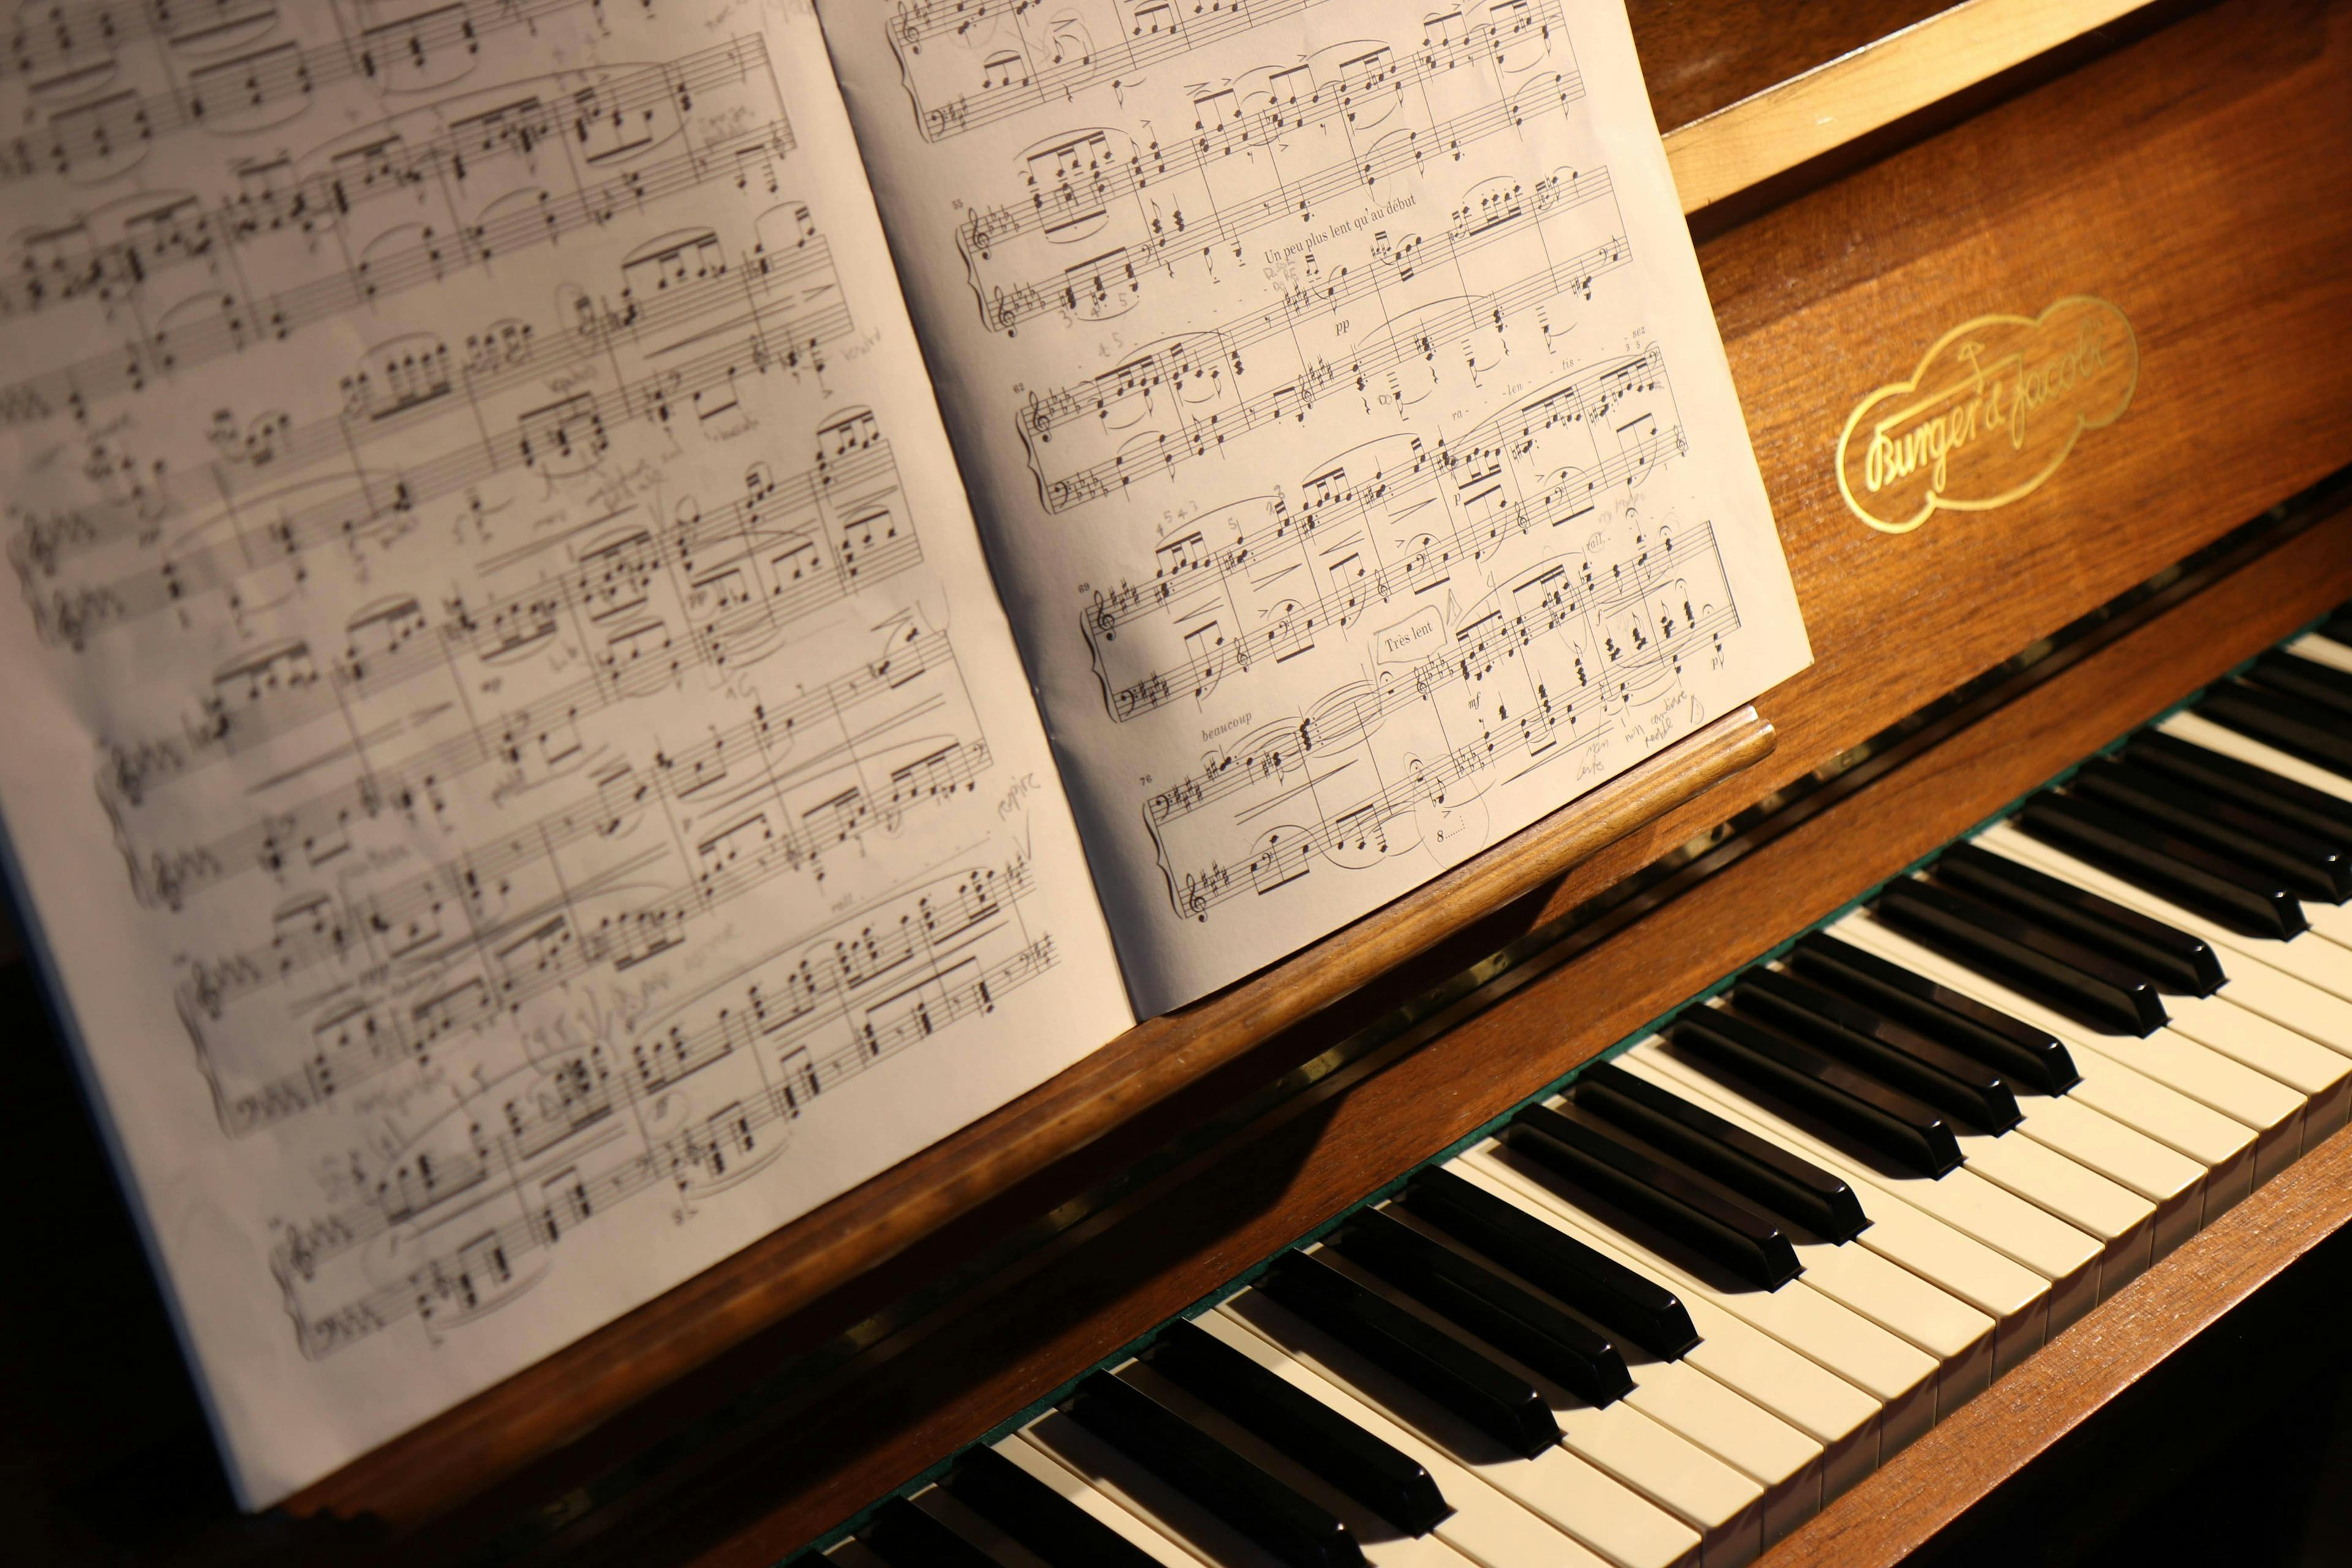 Master the Art of Playing Piano with FSM